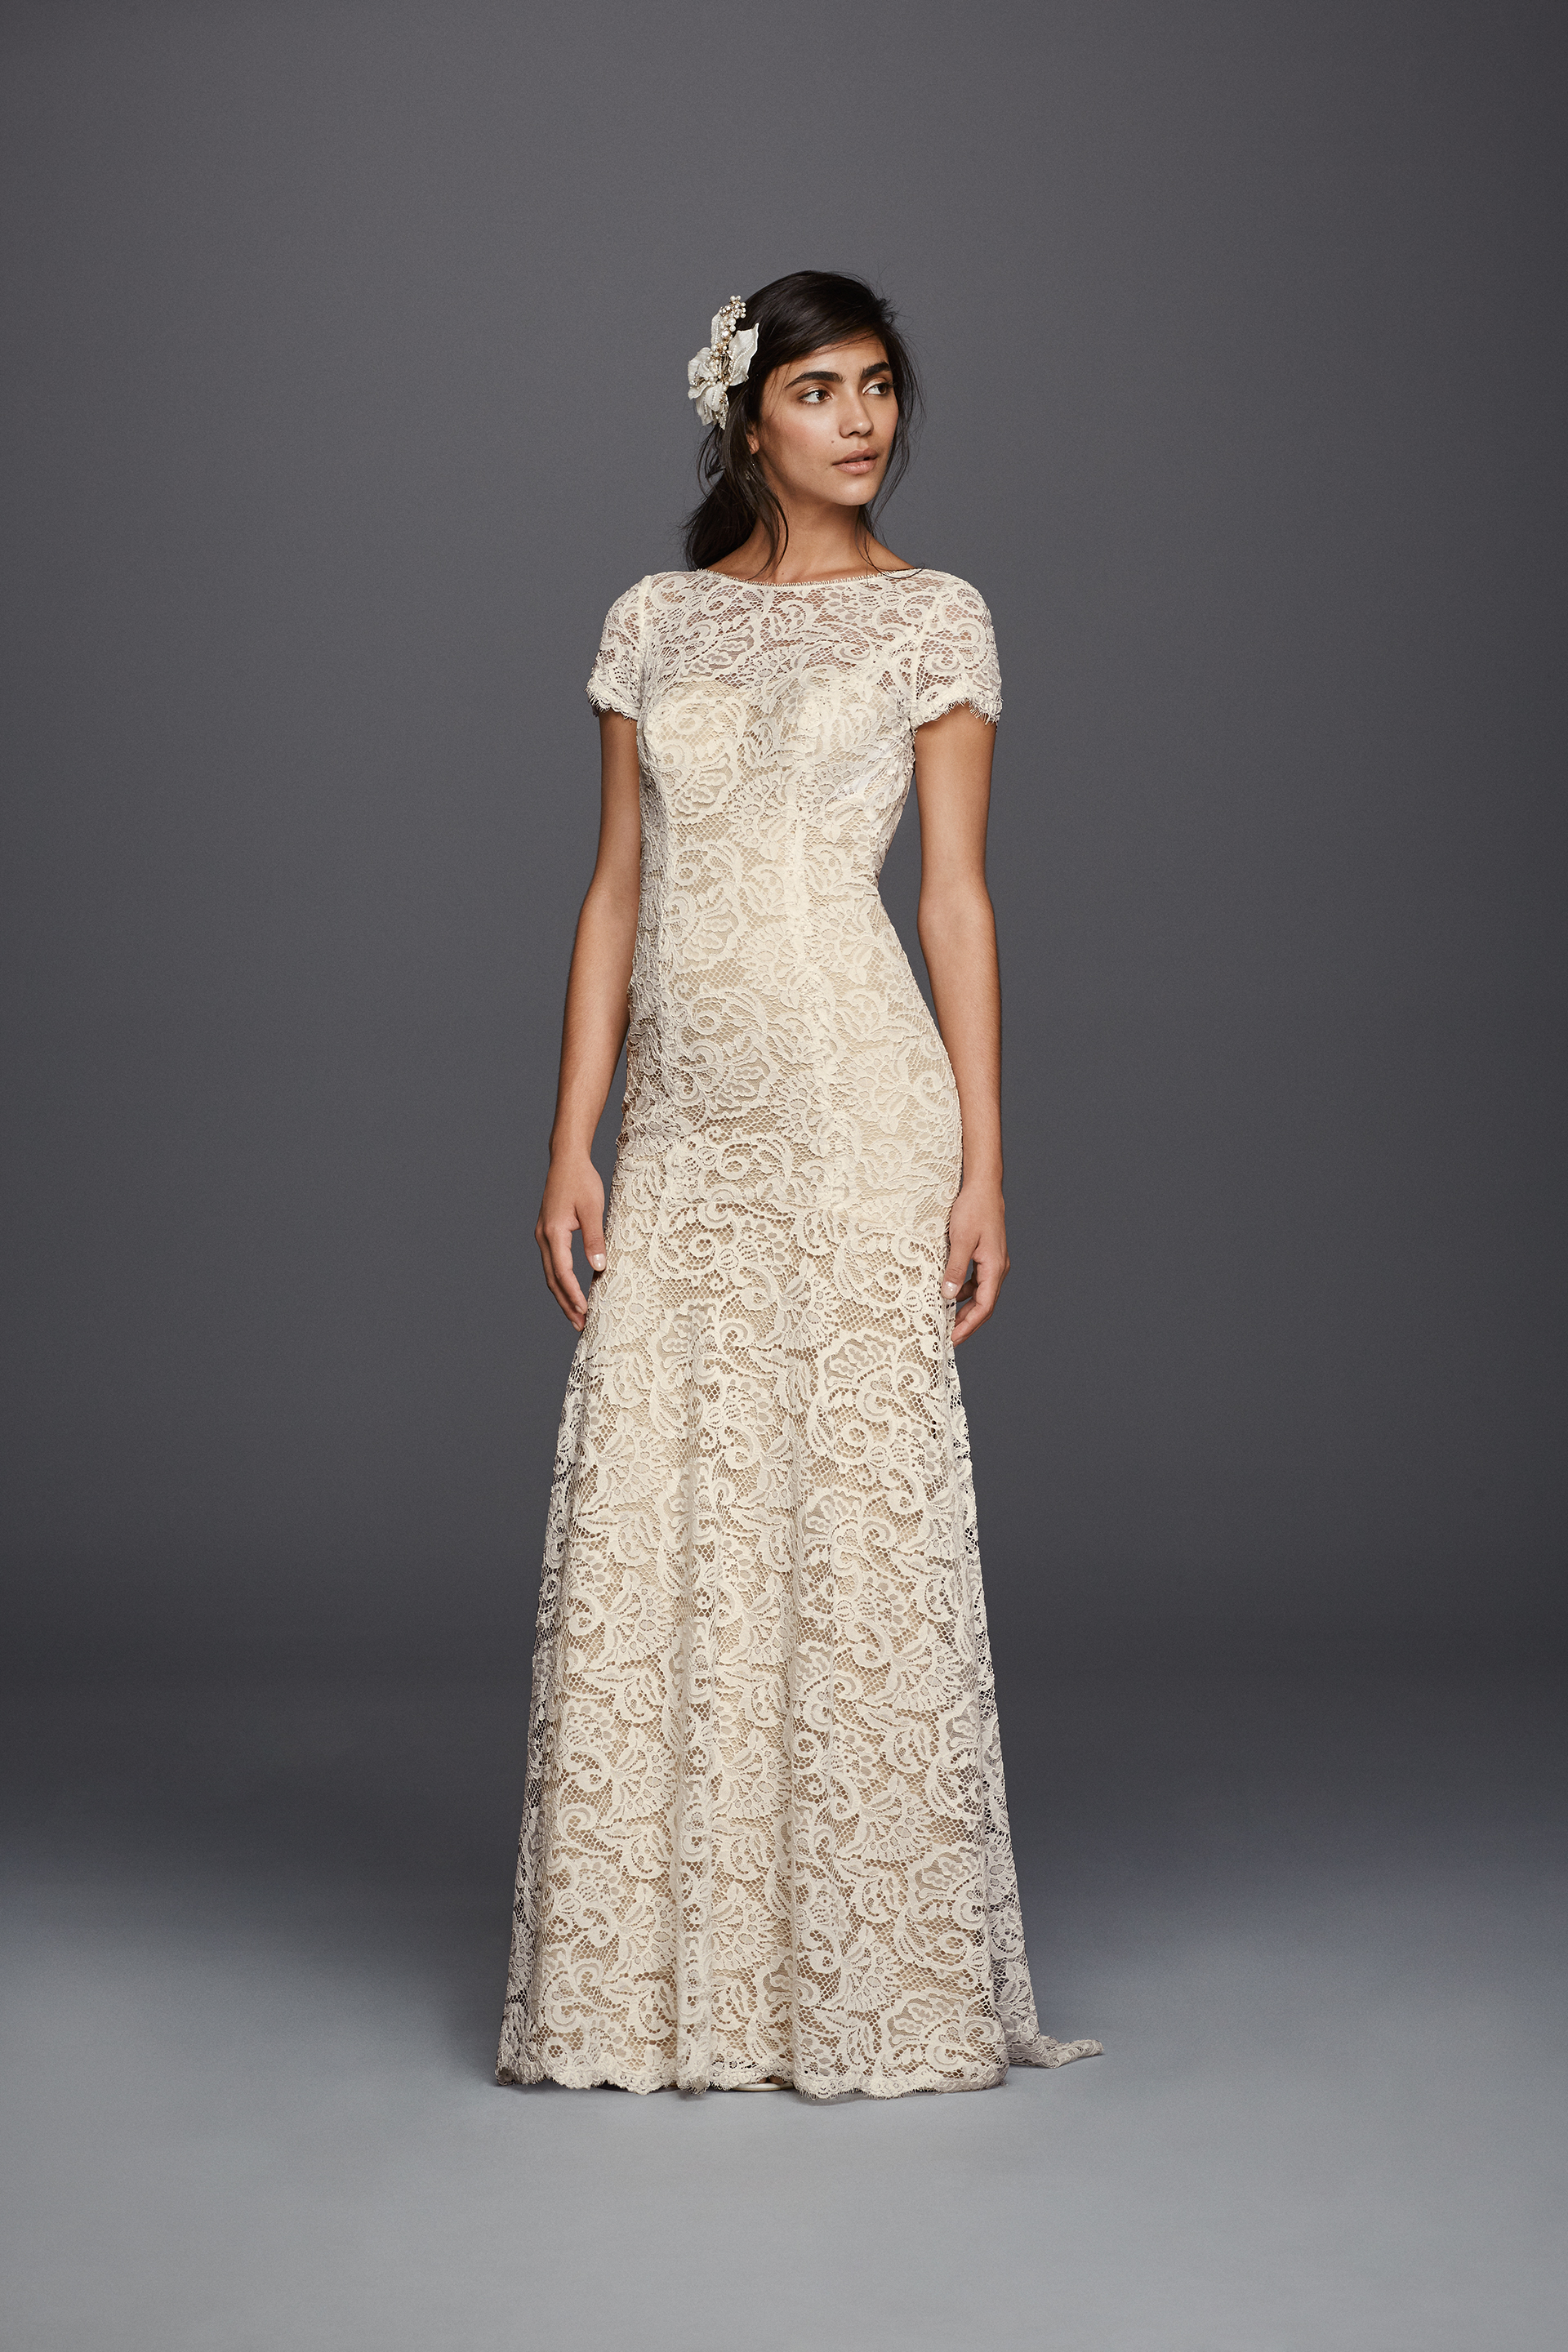 Lace wedding dress with short sleeves for a look like Pippa Middleton's wedding dress. See more dresses with Pippa-like details on the David's Bridal blog.